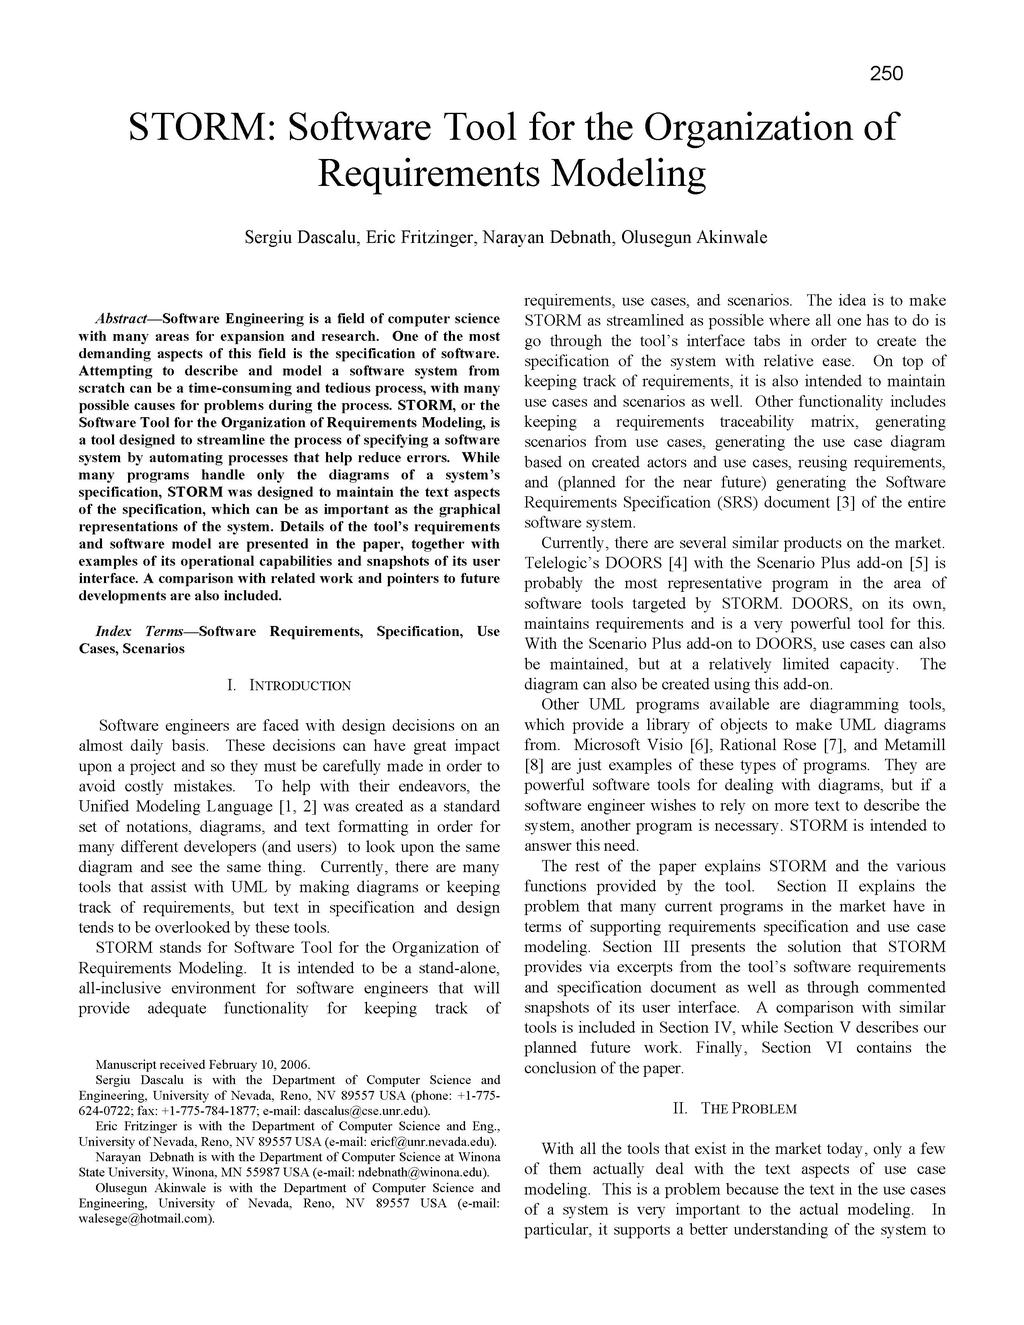 250 STORM: Software Tool for the Organization of Requirements Modeling Sergiu Dascalu, Eric Fritzinger, Narayan Debnath, Olusegun Akinwale Abstract-Software Engineering is a field of computer science